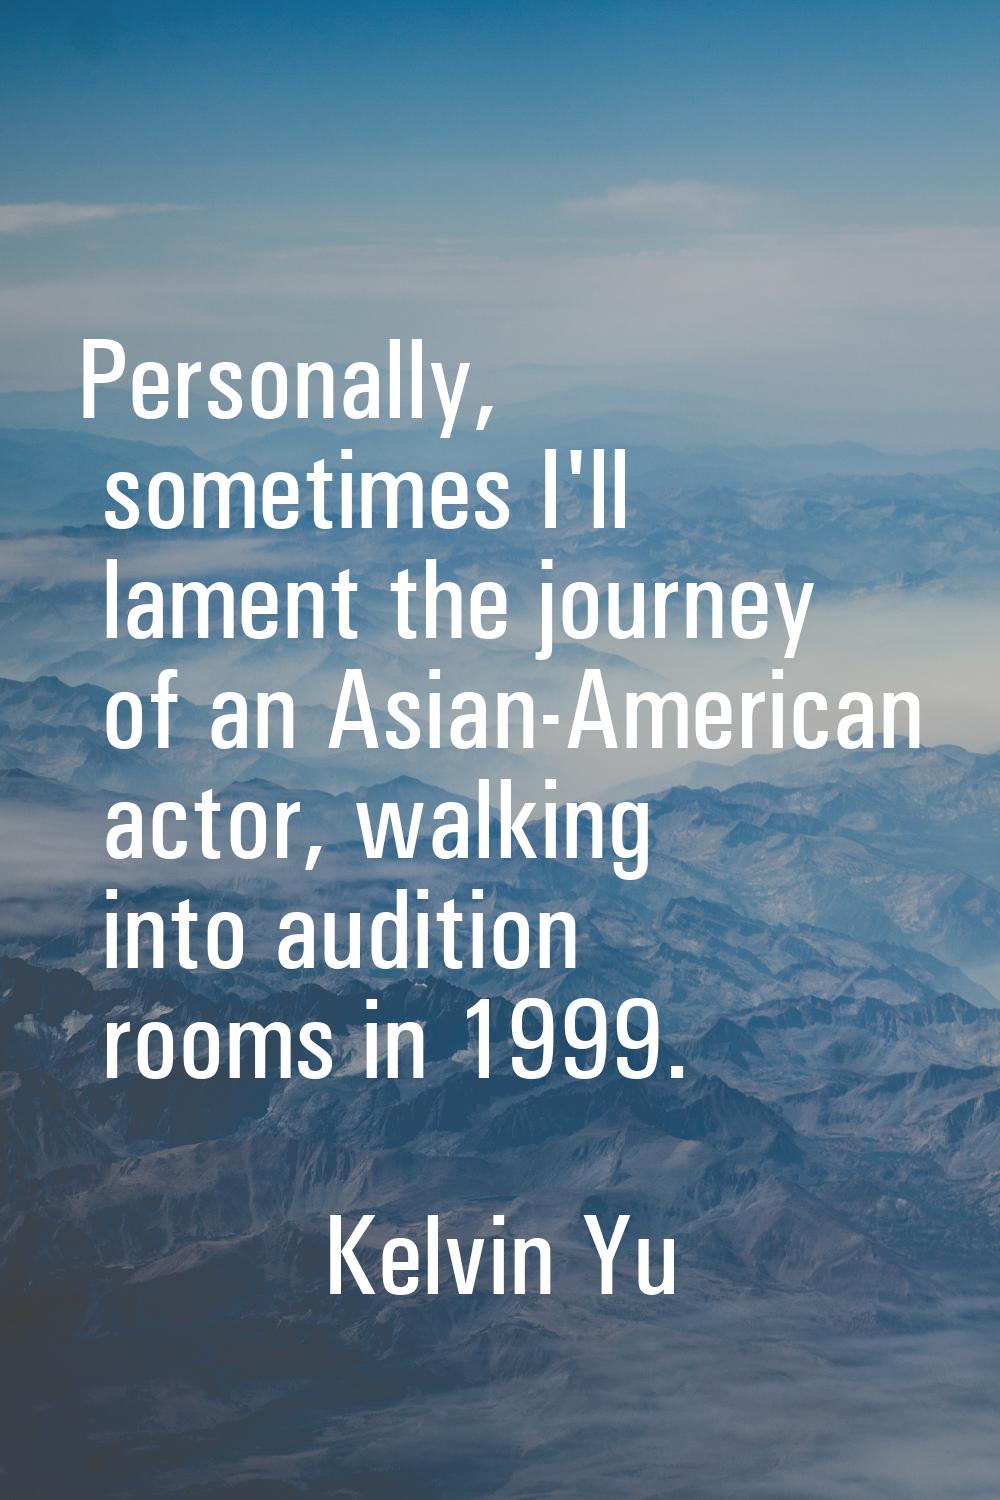 Personally, sometimes I'll lament the journey of an Asian-American actor, walking into audition roo